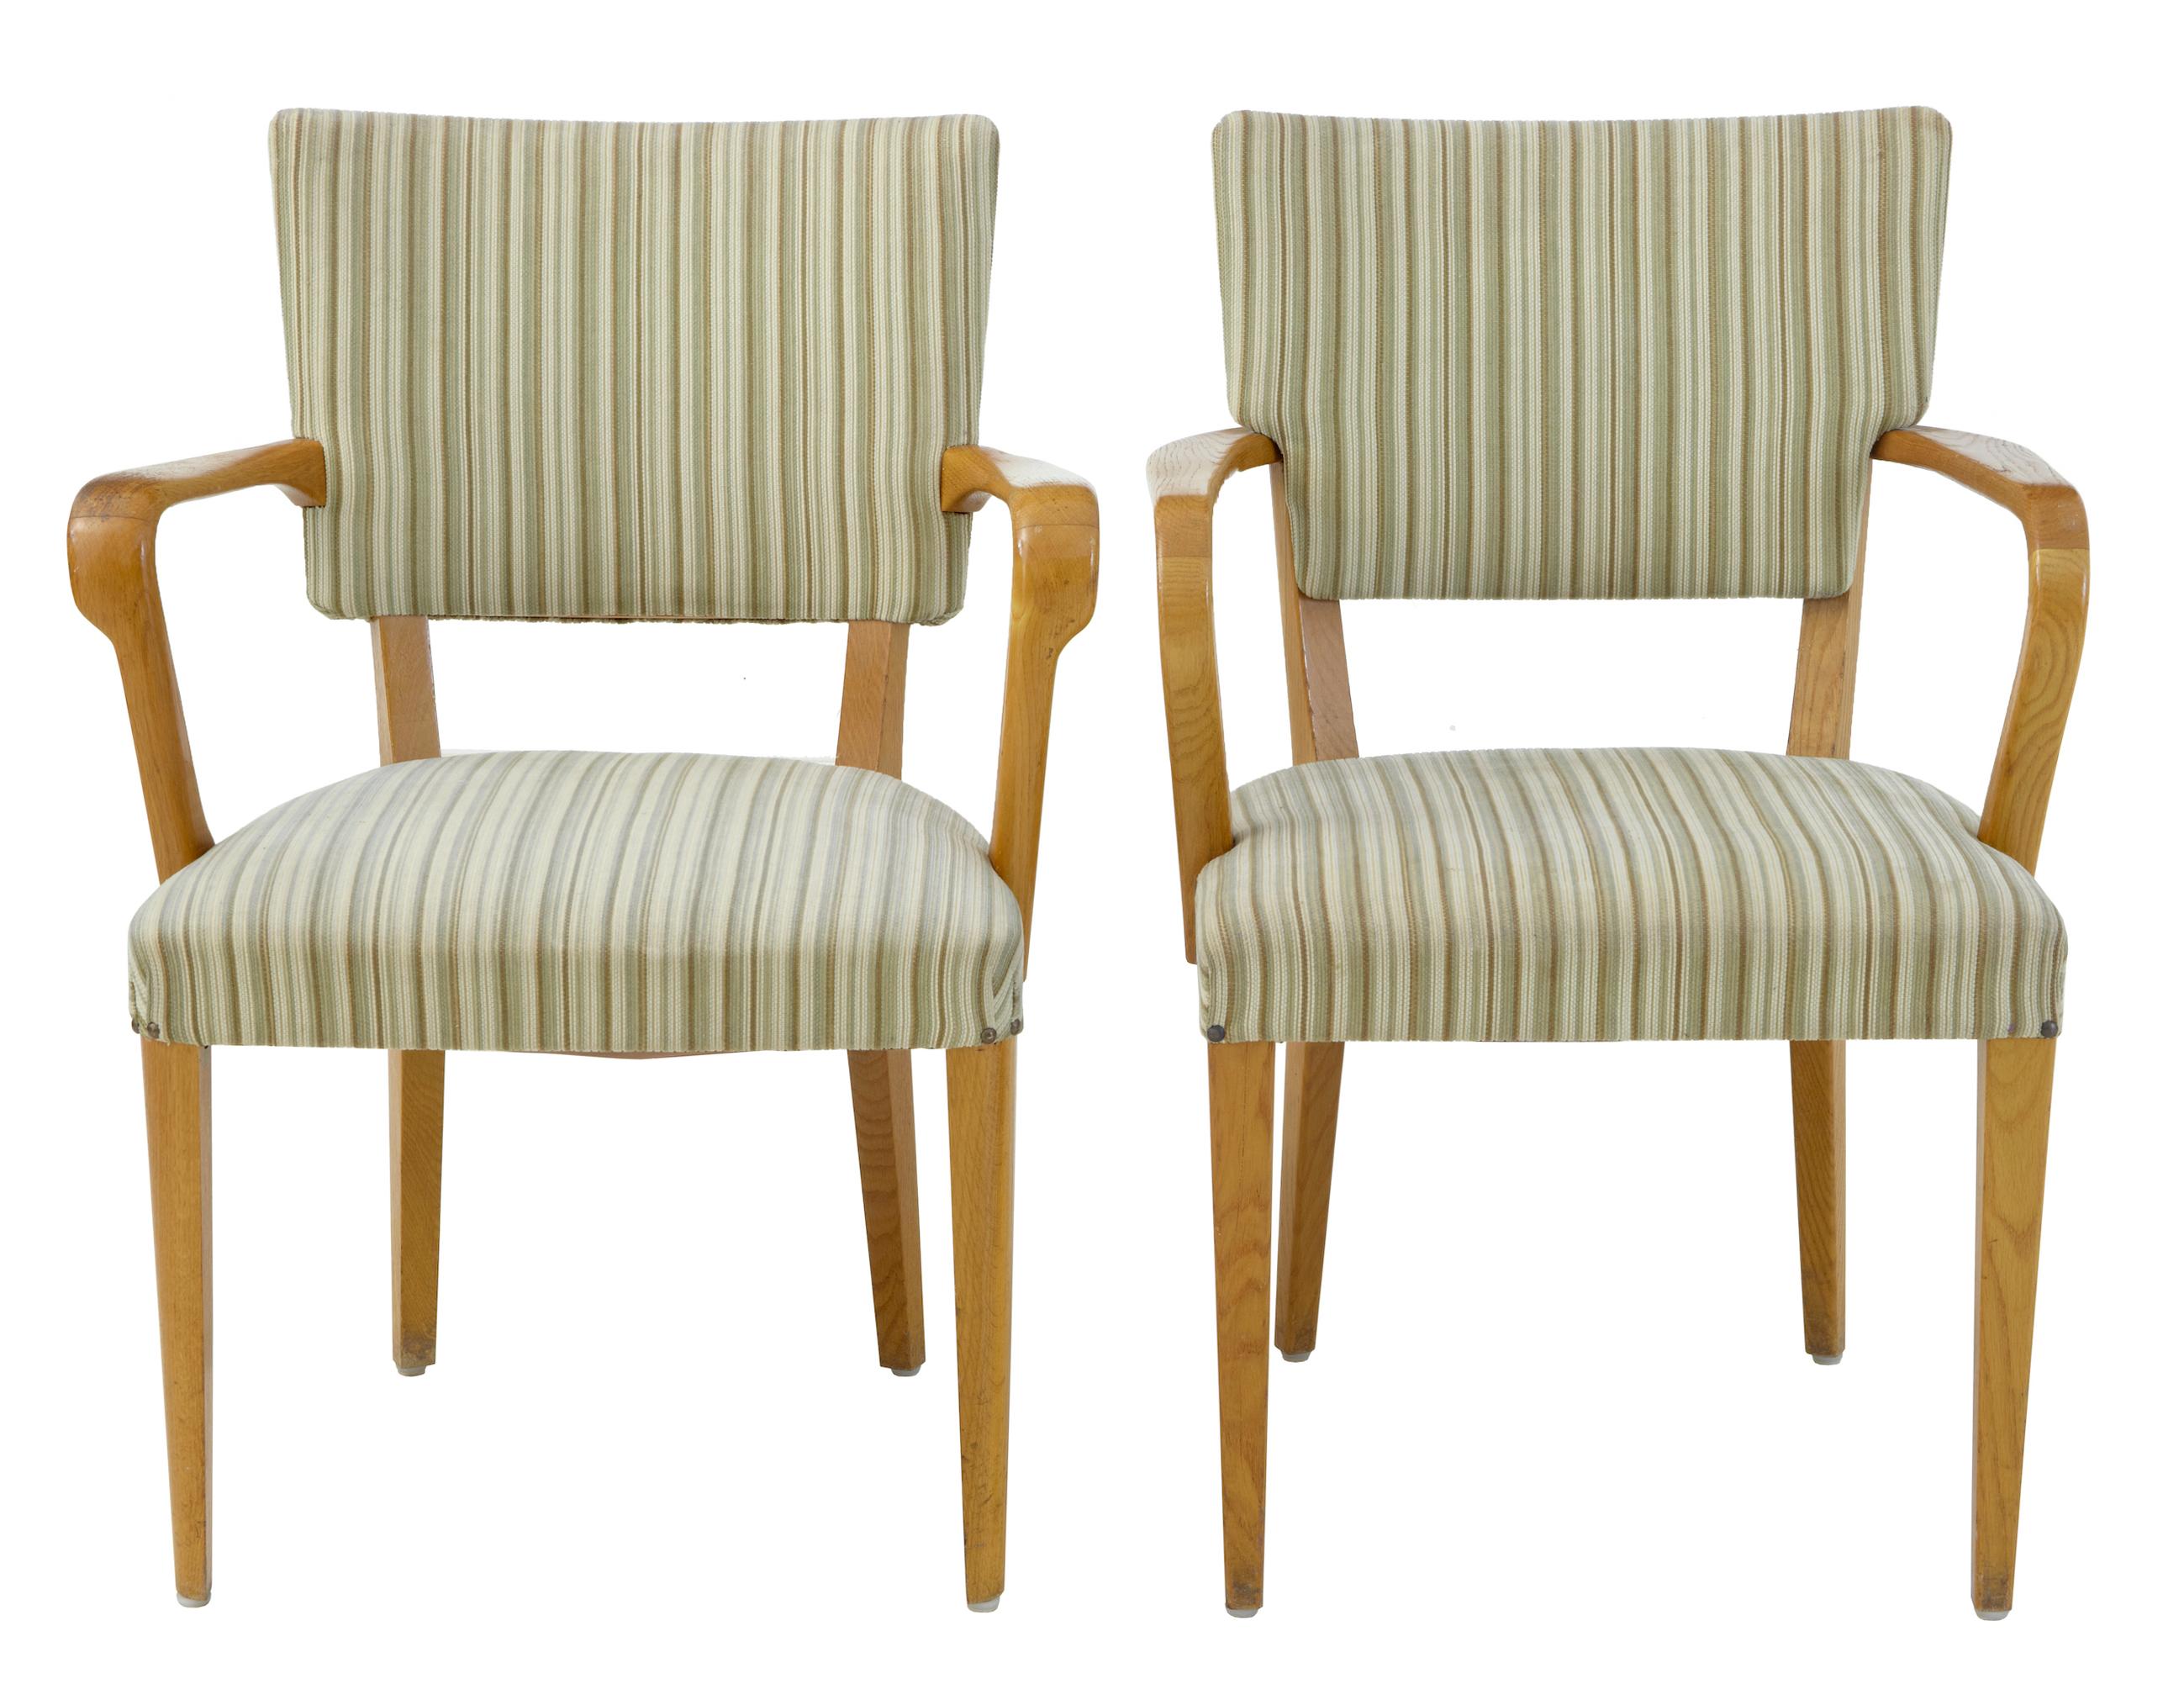 Comfortable late 1960s set of 6 chairs, which comprise of 4 of 1 design and 2 in another. Stamped lansstyrelson karlskrona with makers label of atvidabergs. Differences in design between the 2 models are in the shape to the legs, arms and back, also